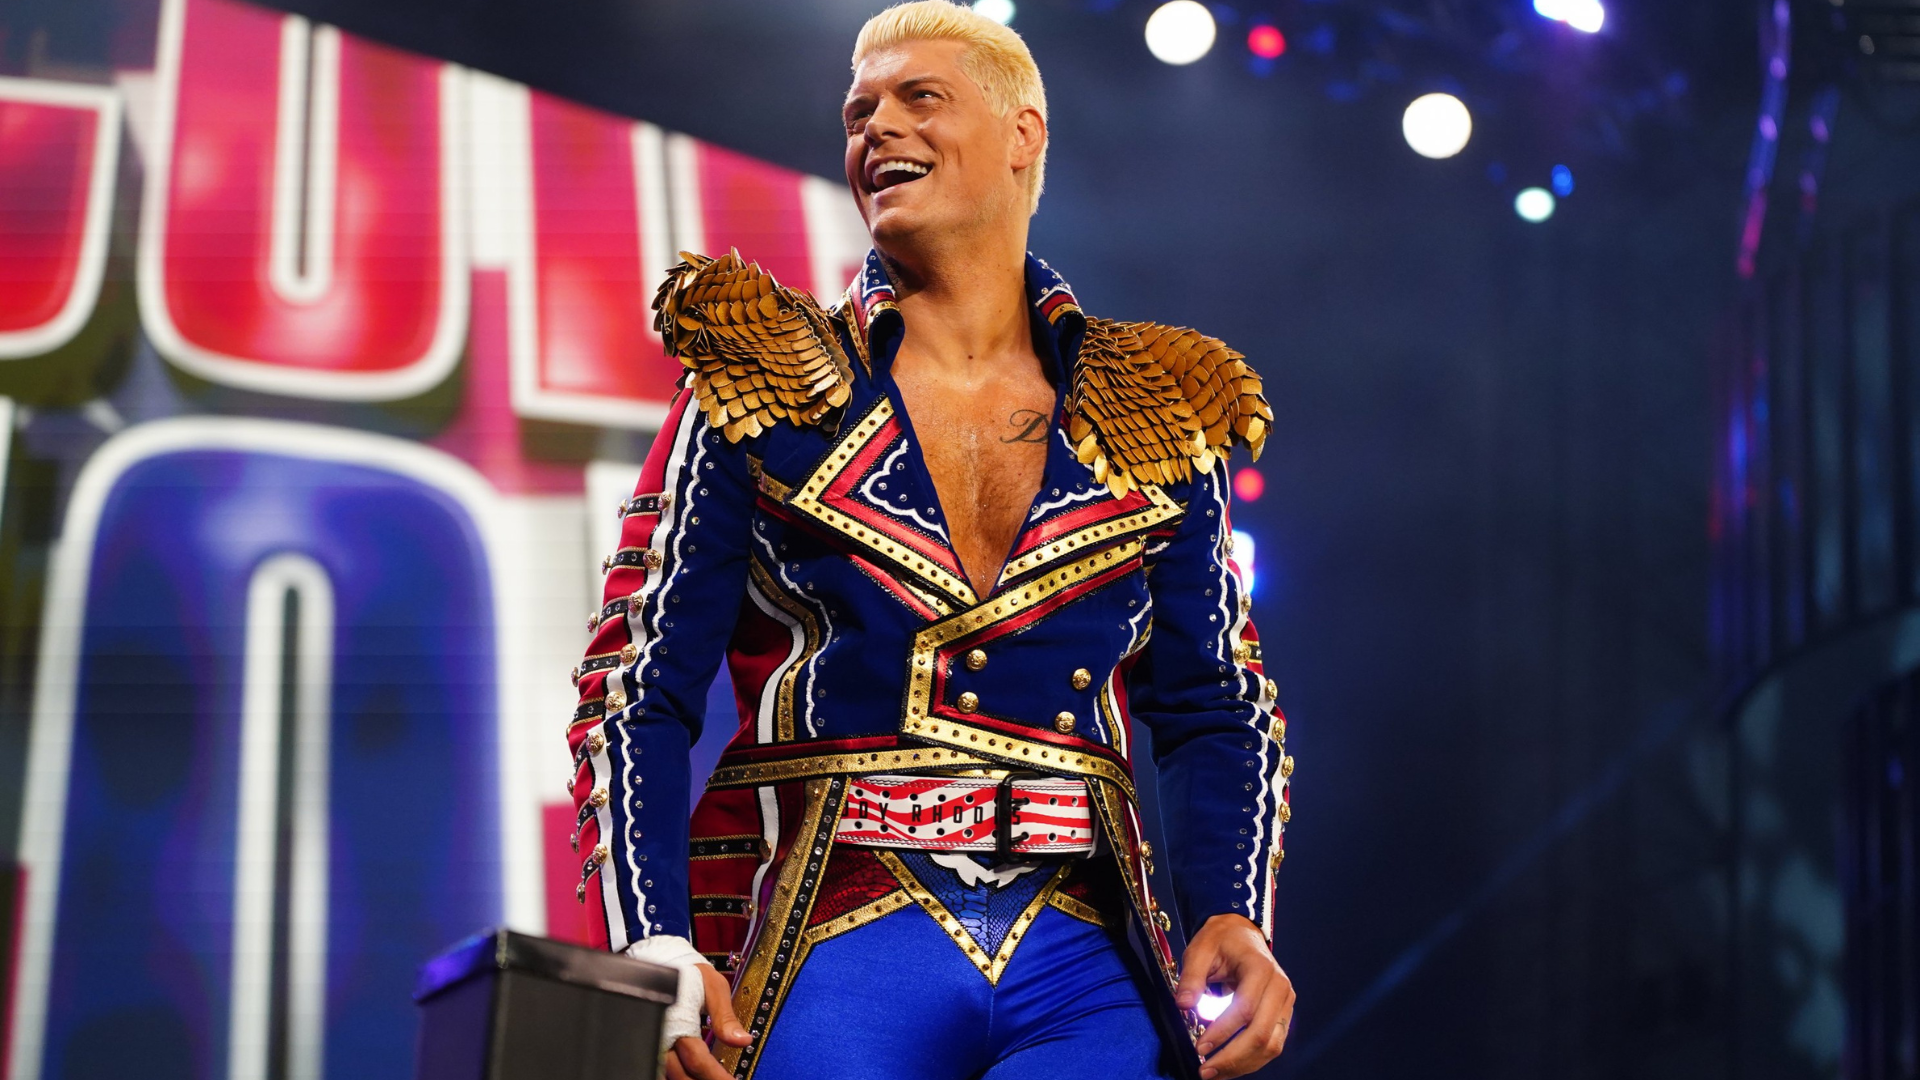 Read more about the article Cody Rhodes To Feature In Upcoming AEW Video Game